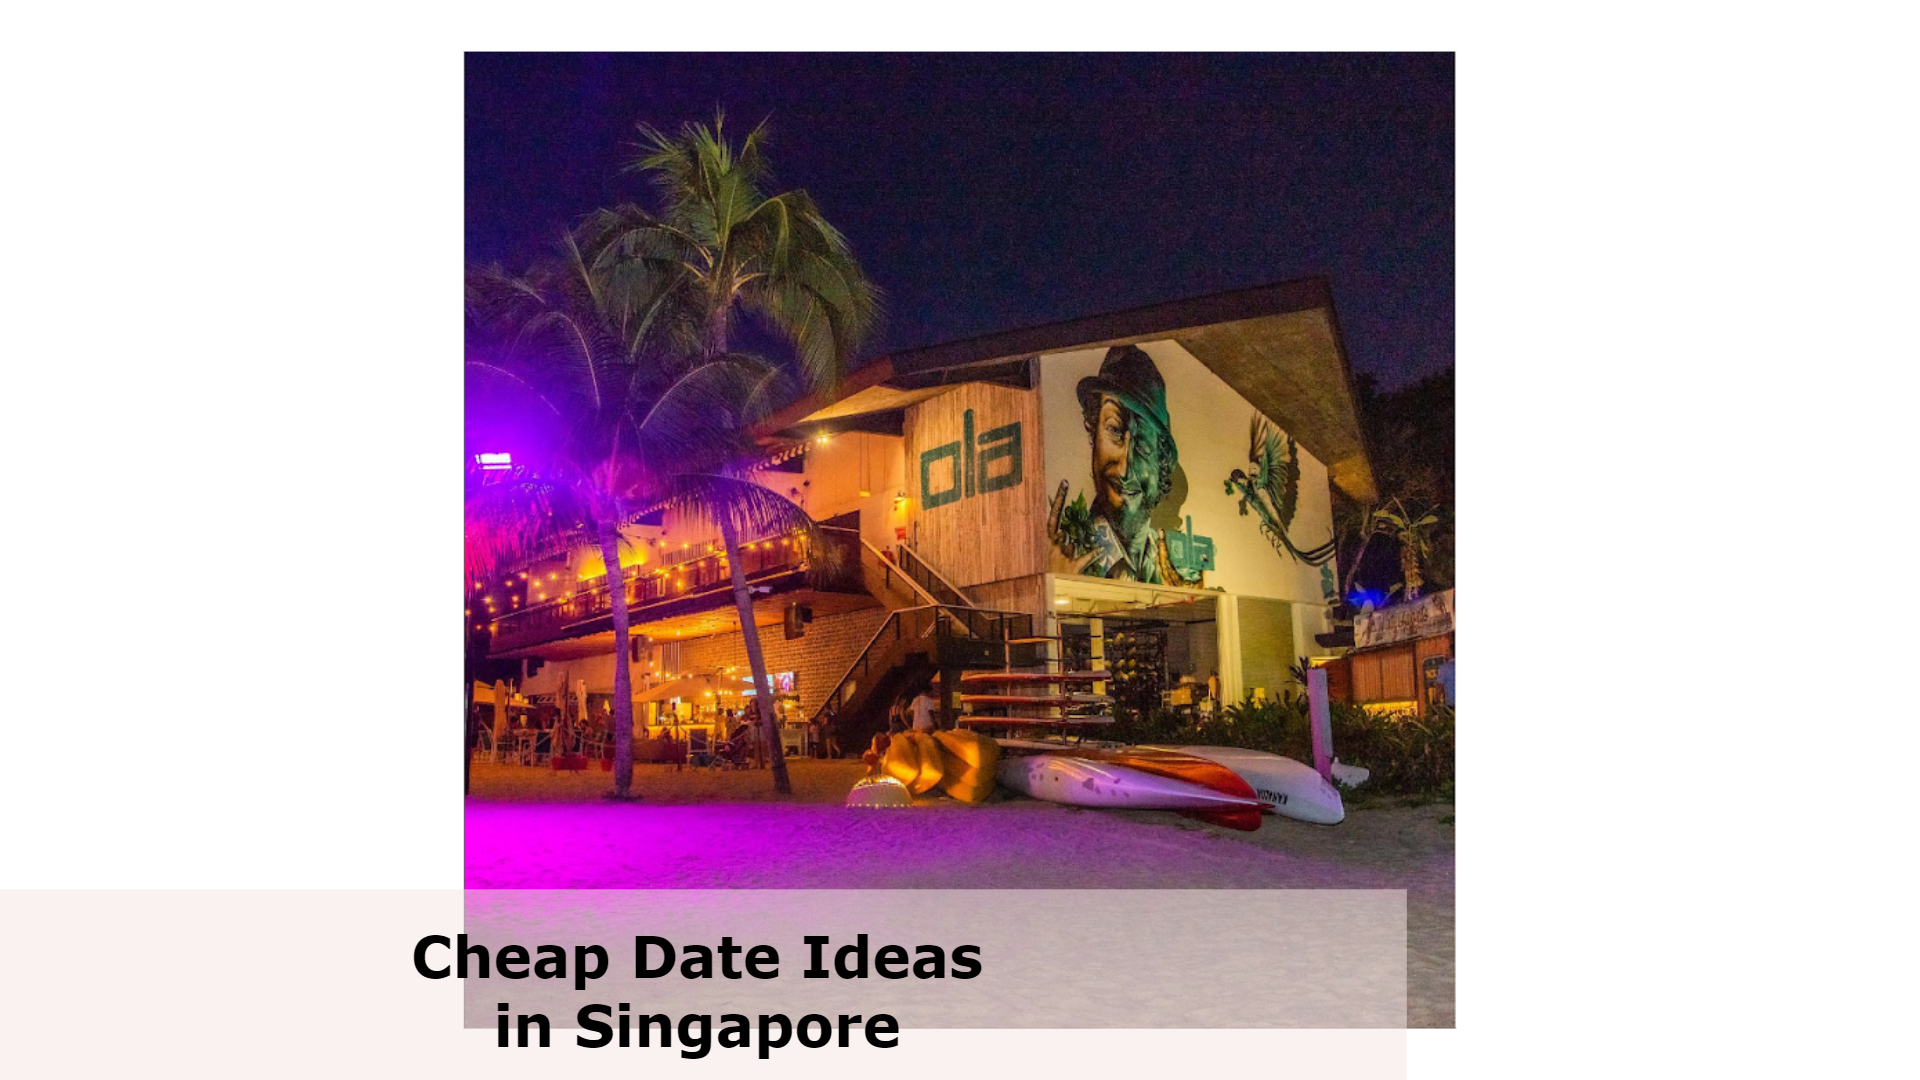 Beach Date - Cheap Date Ideas in Singapore, Cheap Date Ideas Singapore, best cheap date ideas in Singapore under $20, Fun And Cheap Date Ideas, Where can I go on a date for free in Singapore?, What can you do for a cheap date?, What's a good cheap first date?, What can couples do for free?, What to do for anniversary Singapore, fun things to do on a date, outdoor activities for couples Singapore, cheap date ideas singapore, couple activities singapore, free date ideas singapore, couple activities singapore, fun date ideas singapore, date ideas singapore covid, where to go for date night, date ideas singapore phase 2, Where can I date in Singapore?,What is the cheapest date possible?,Where can I go on a Phase 2 date?,What should I do for a second date in Singapore?,